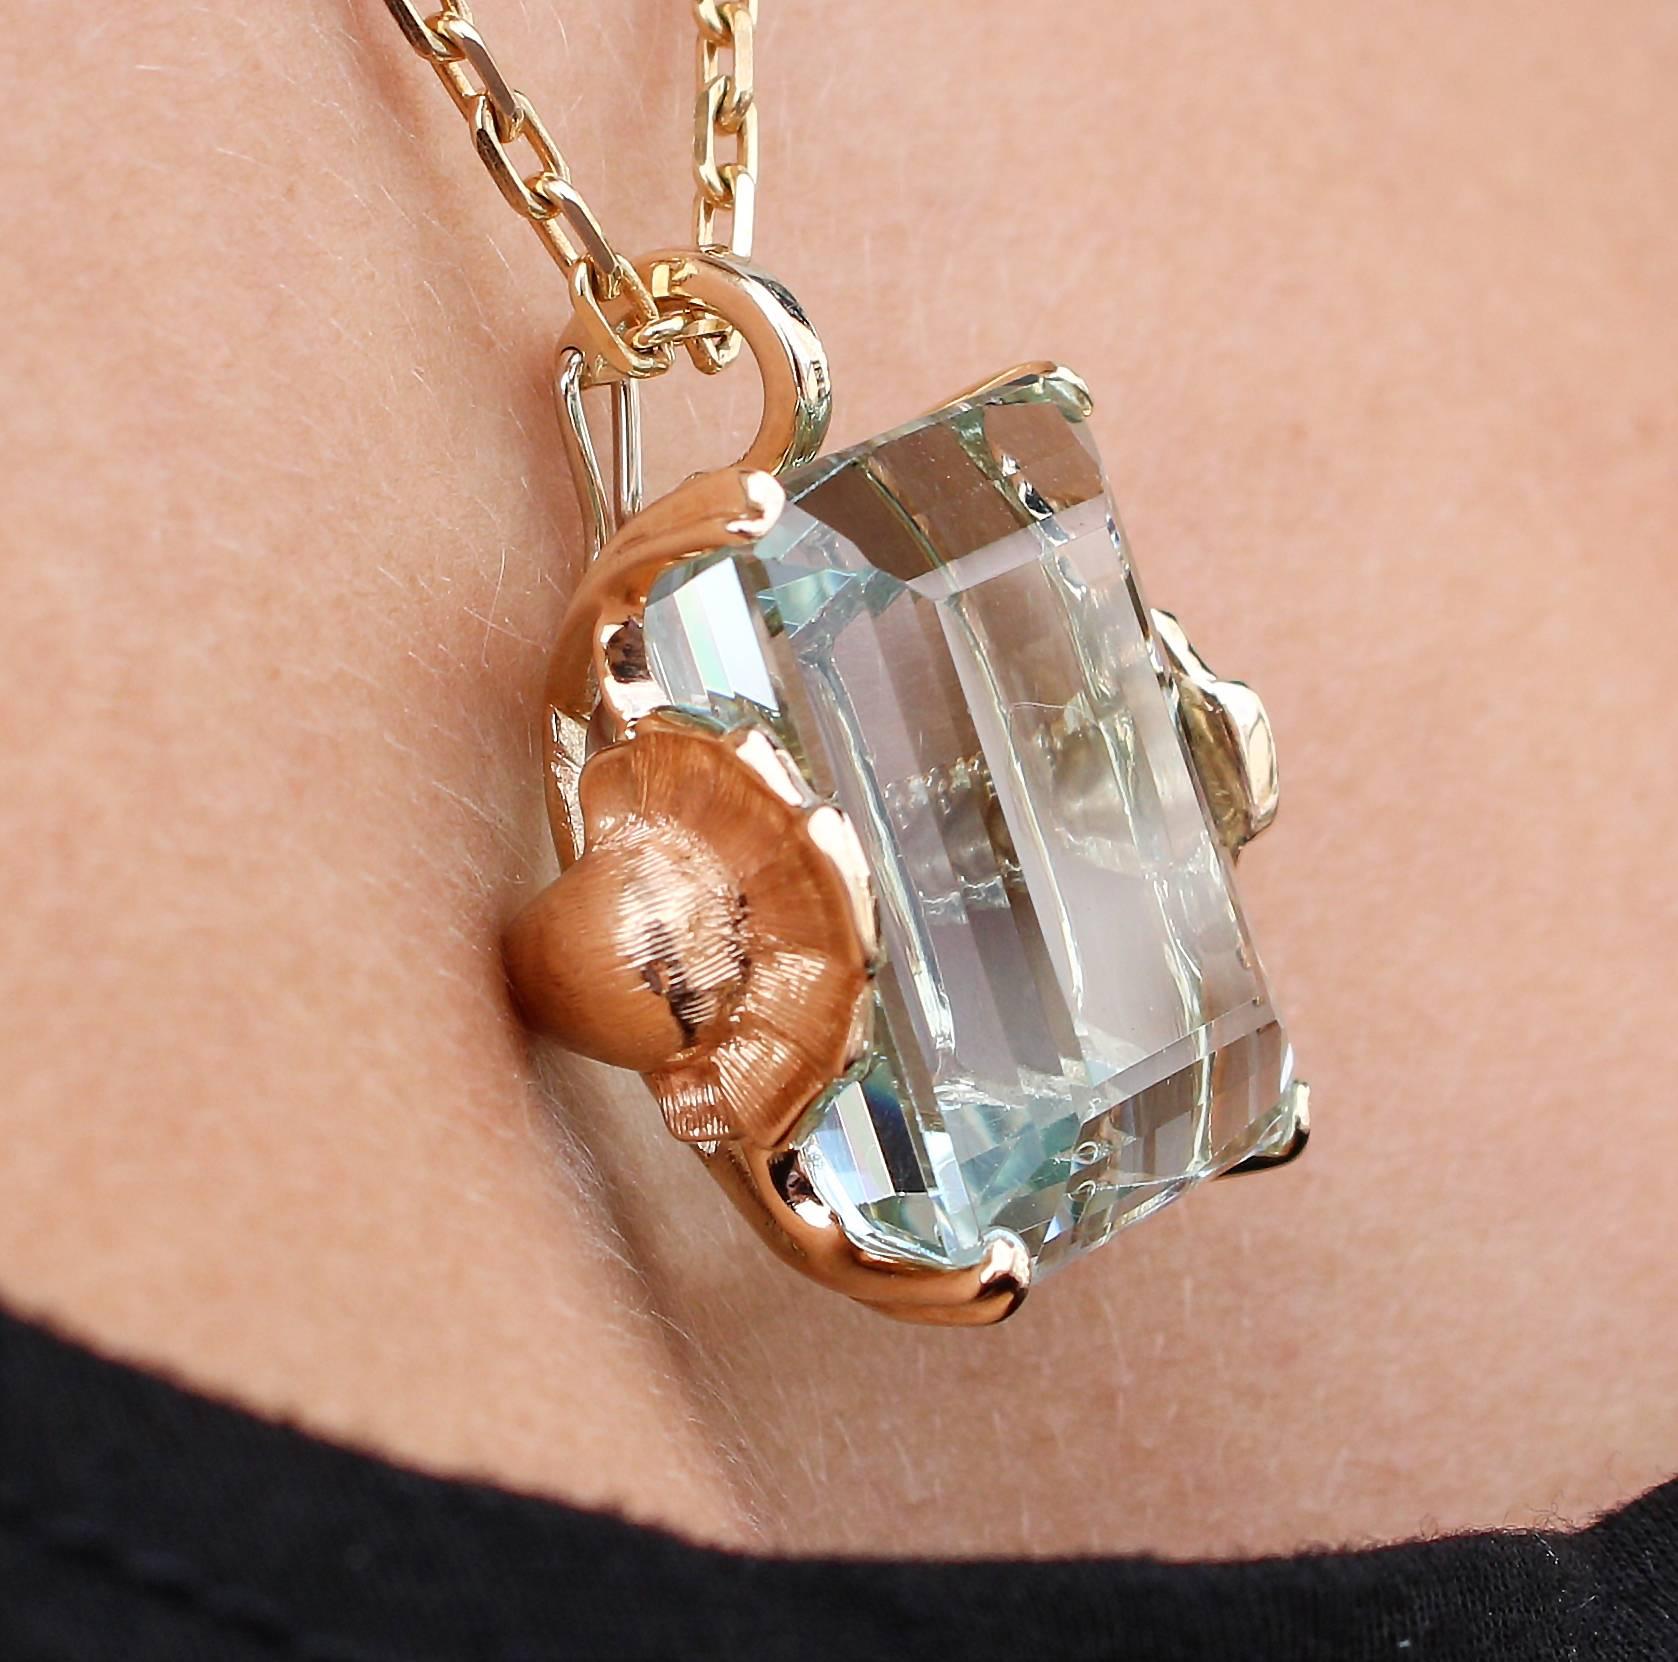 This 1940s Retro pendant features an emerald cut aquamarine, which measures 23 x 19mm and weighs approximately 47ct. The stone is set in a beautiful 14k yellow gold setting decorated by a flower on each side. The pendant's bail opens to allow the